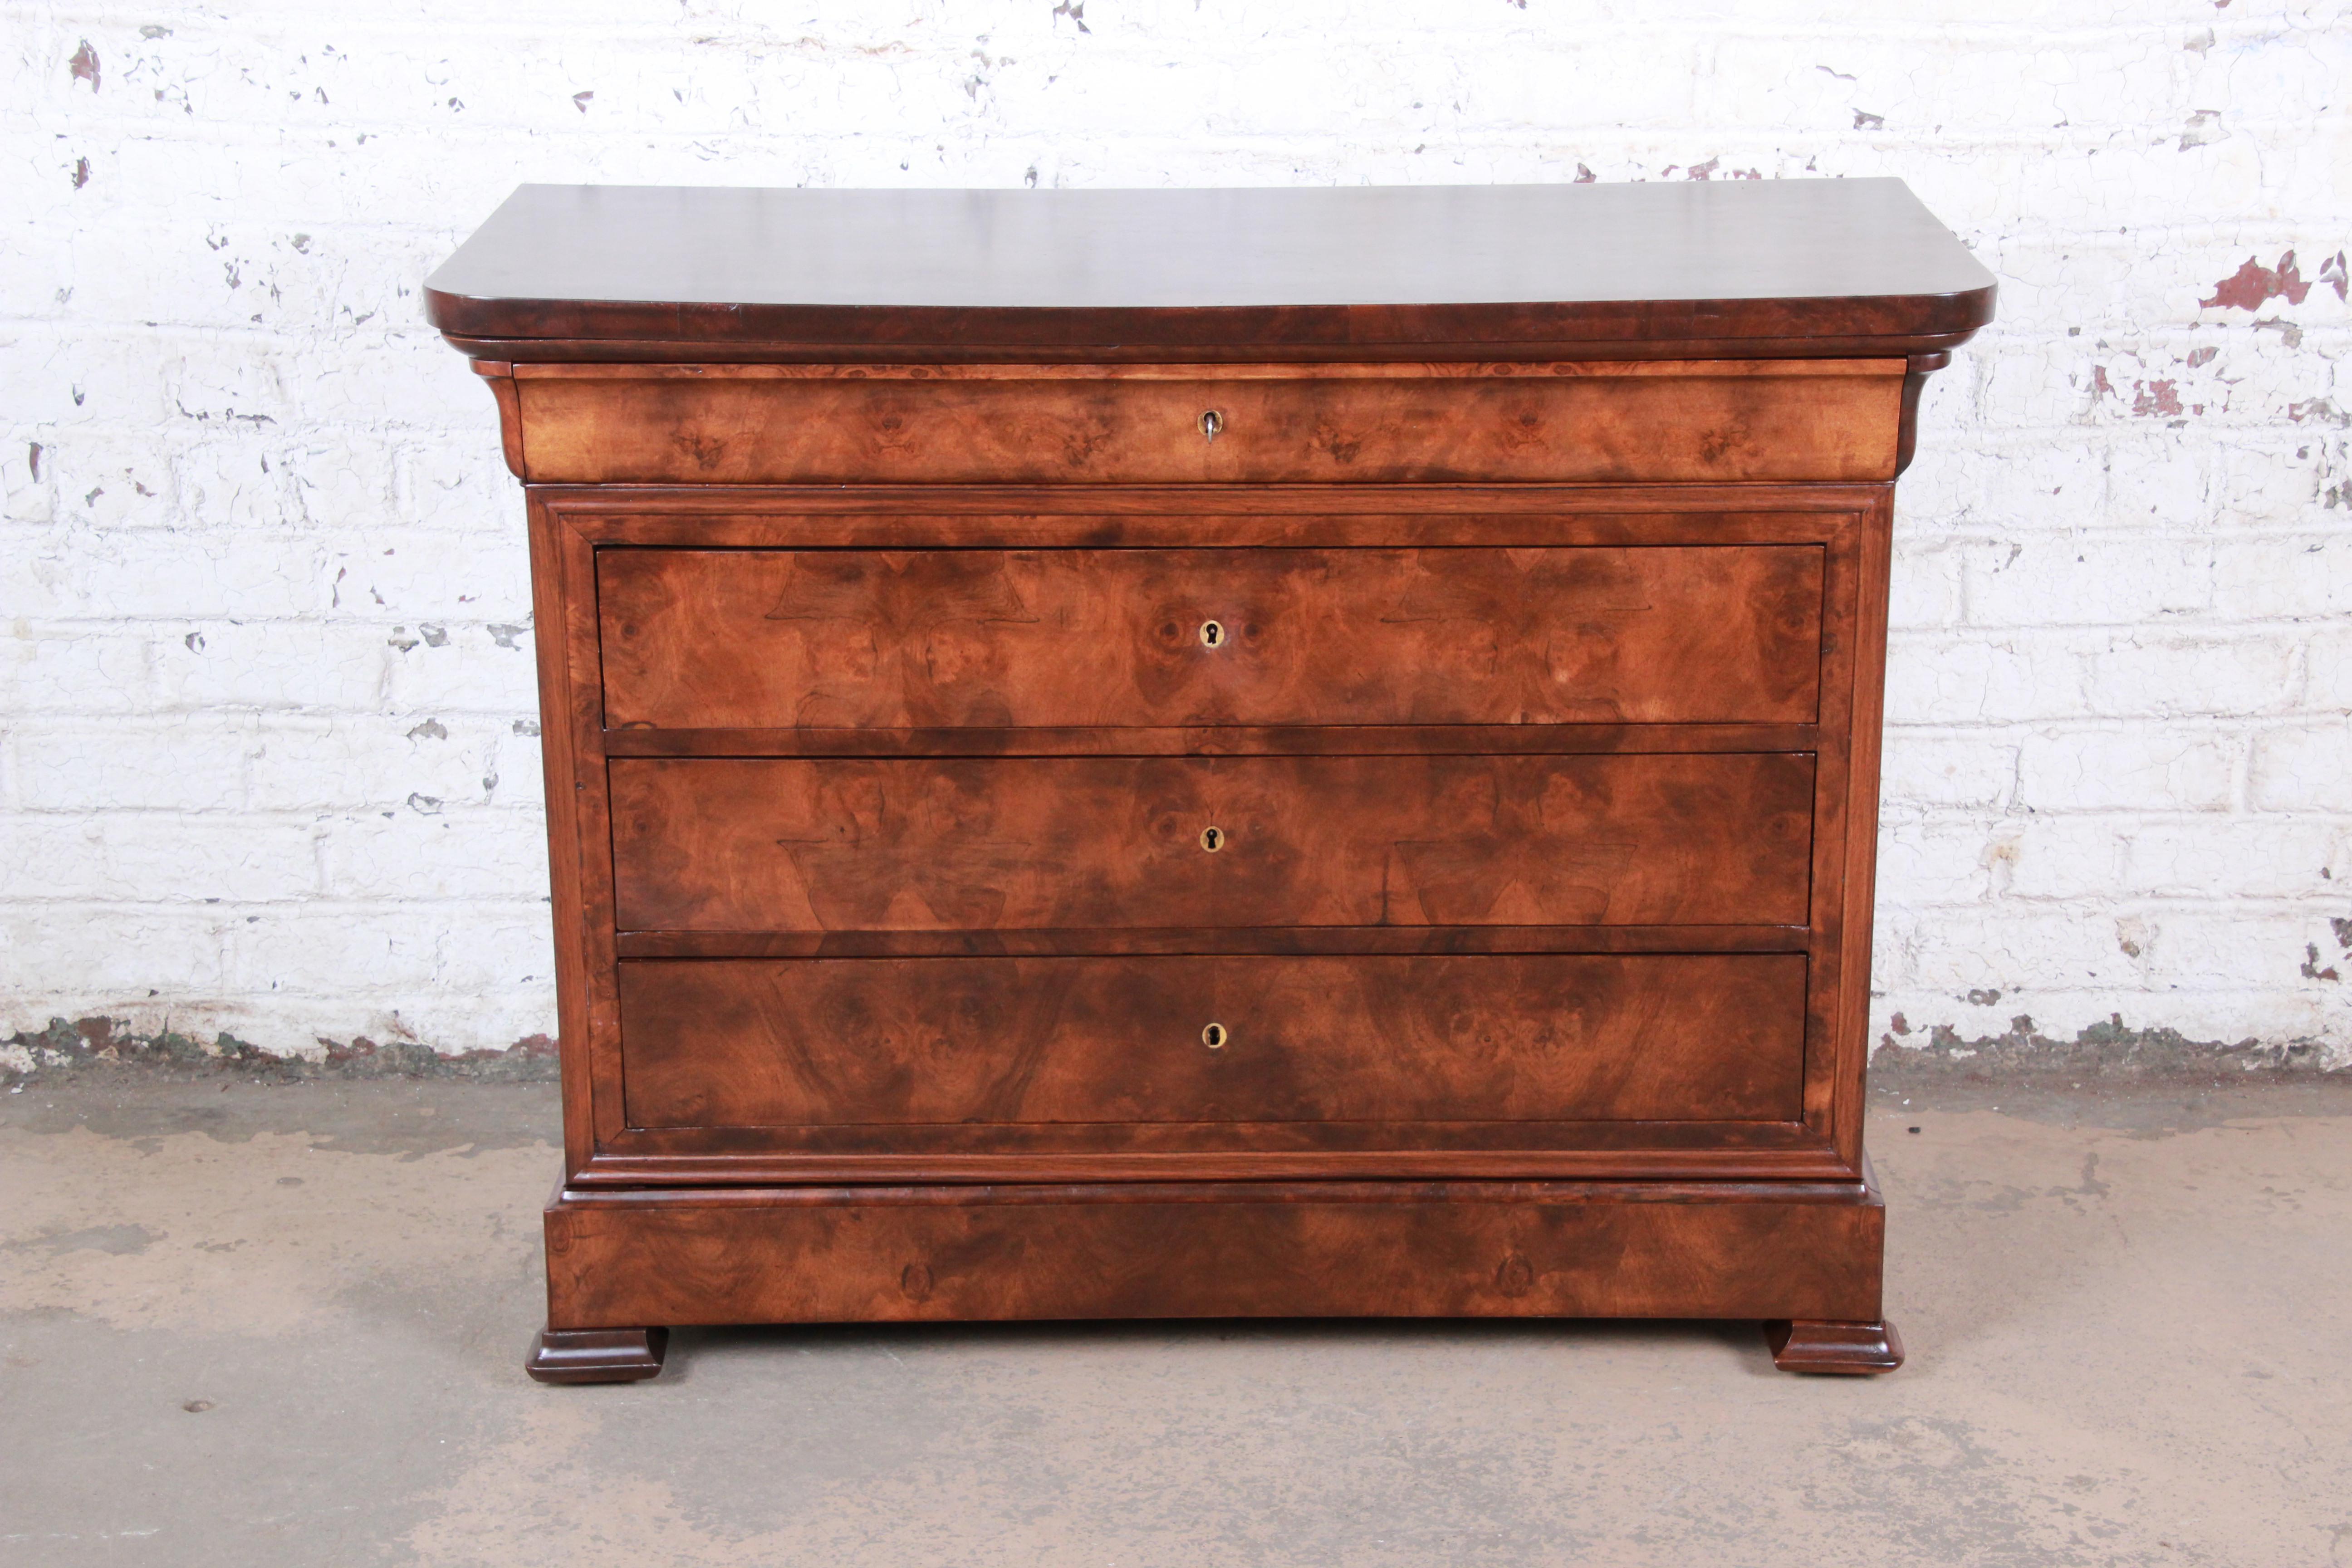 An exceptional French Louis Philippe burled walnut chest of drawers or commode, circa 1840. The dresser features stunning wood grain and elegant style. It offers good storage, with five dovetailed drawers. The top four drawers have locks, and the